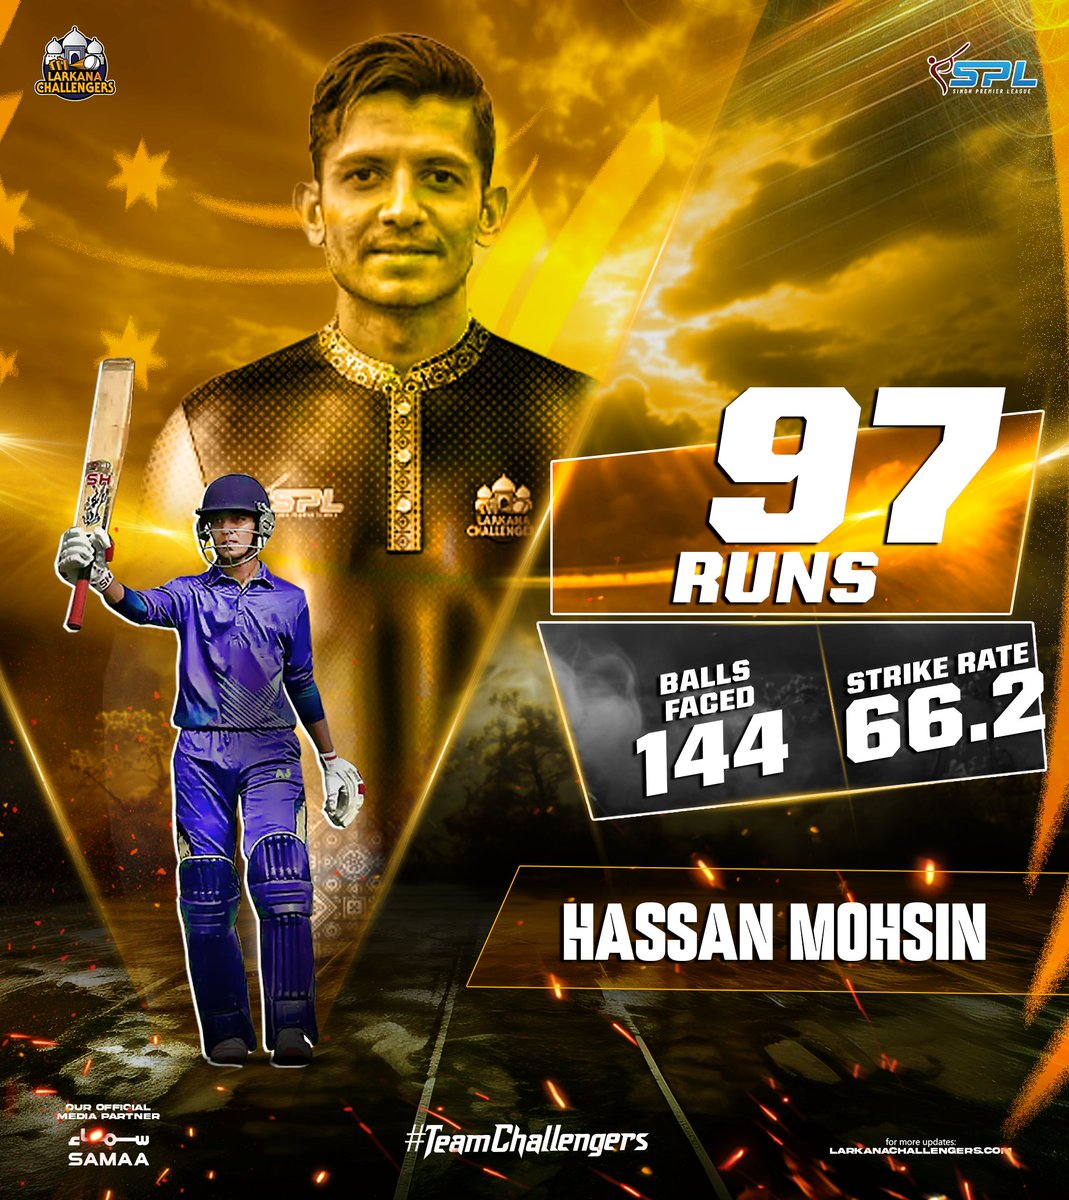 𝗔𝗣𝗣𝗥𝗘𝗖𝗜𝗔𝗧𝗜𝗢𝗡 𝗣𝗢𝗦𝗧👉⚡

A stellar performance at the Presidents Trophy 2023/24.

Challengers' emerging sensation, 
Hassan Mohsin, masterfully notched an impressive 97 off 144 balls, truly exemplifying cricket prowess  ✨ 

#TeamChallengers💜 #SPL #PresidentTrophy